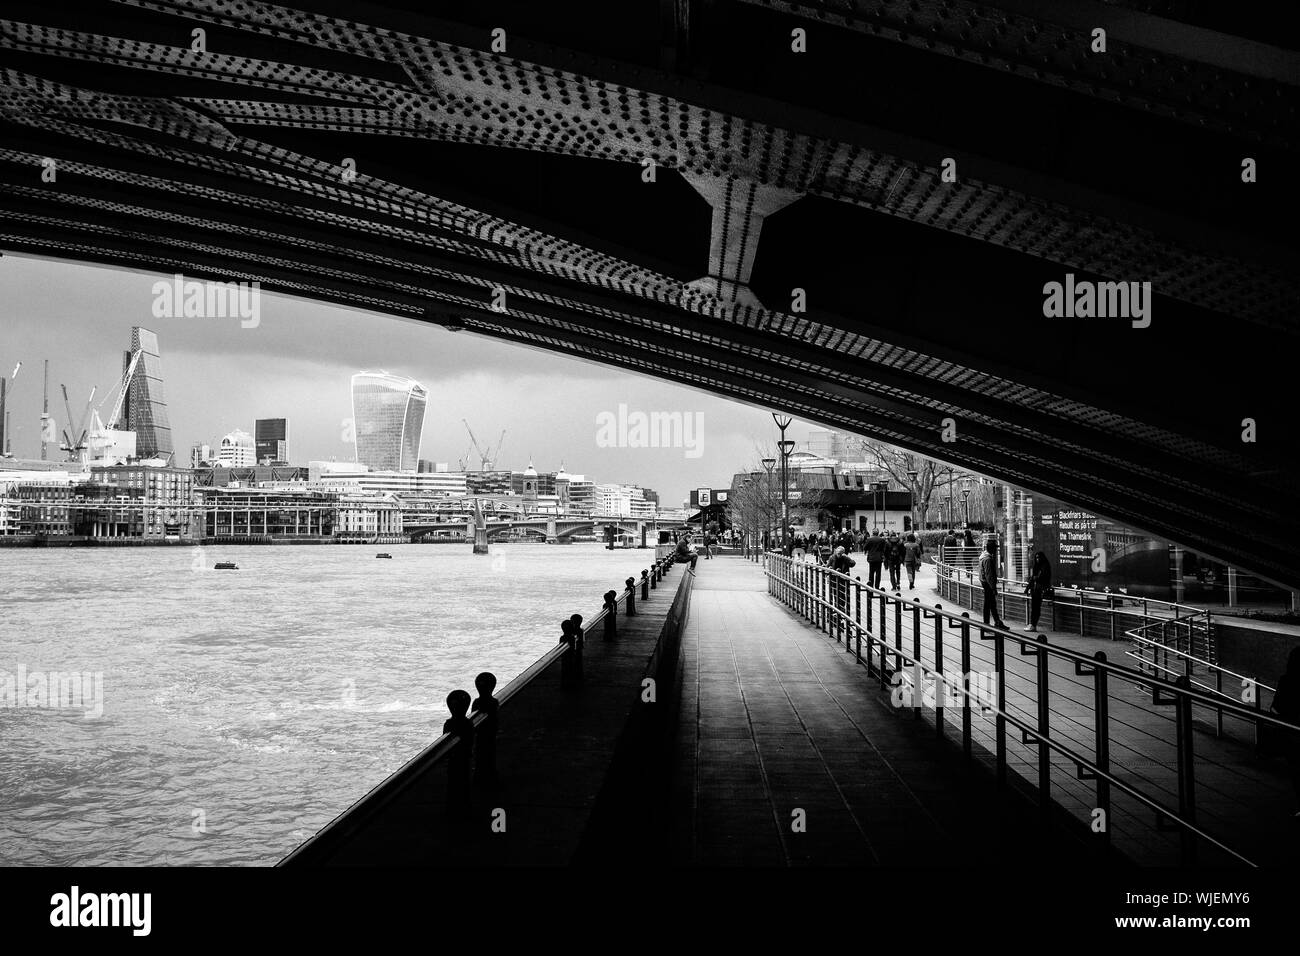 Footbridge over the river thames Black and White Stock Photos & Images ...